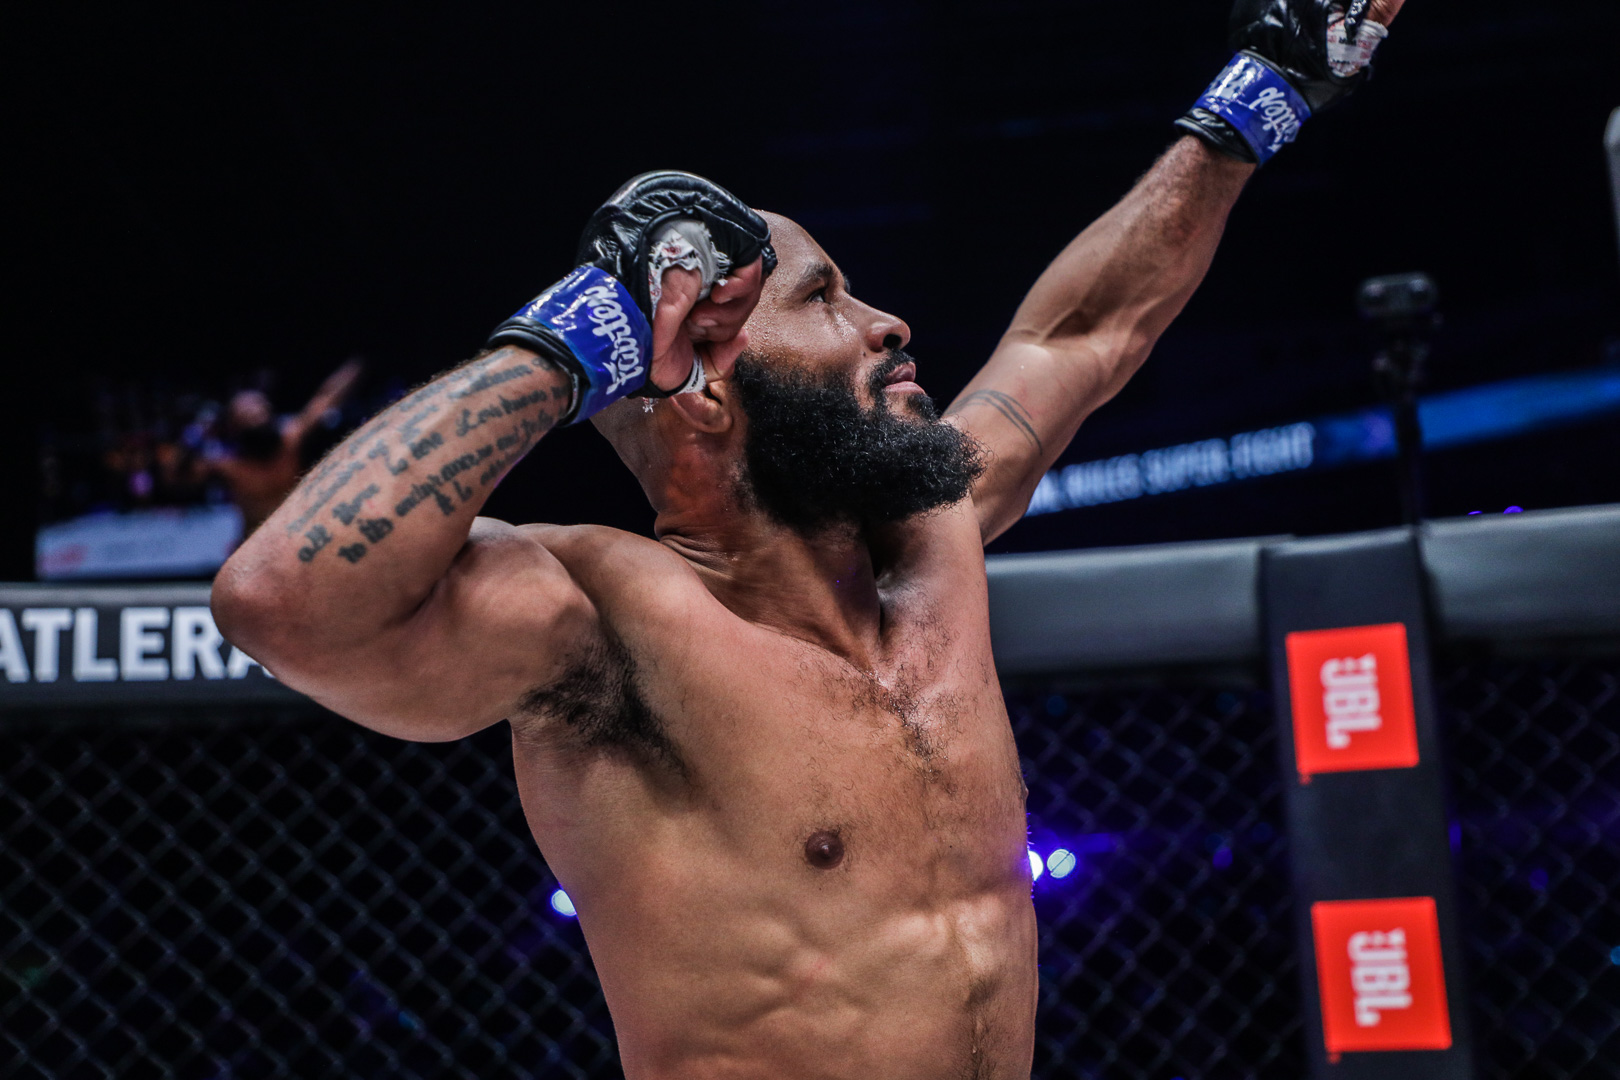 Demetrious Johnson celebrates his victory over Rodtang Jitmuangnon after their mixed rules superfight at ONE X